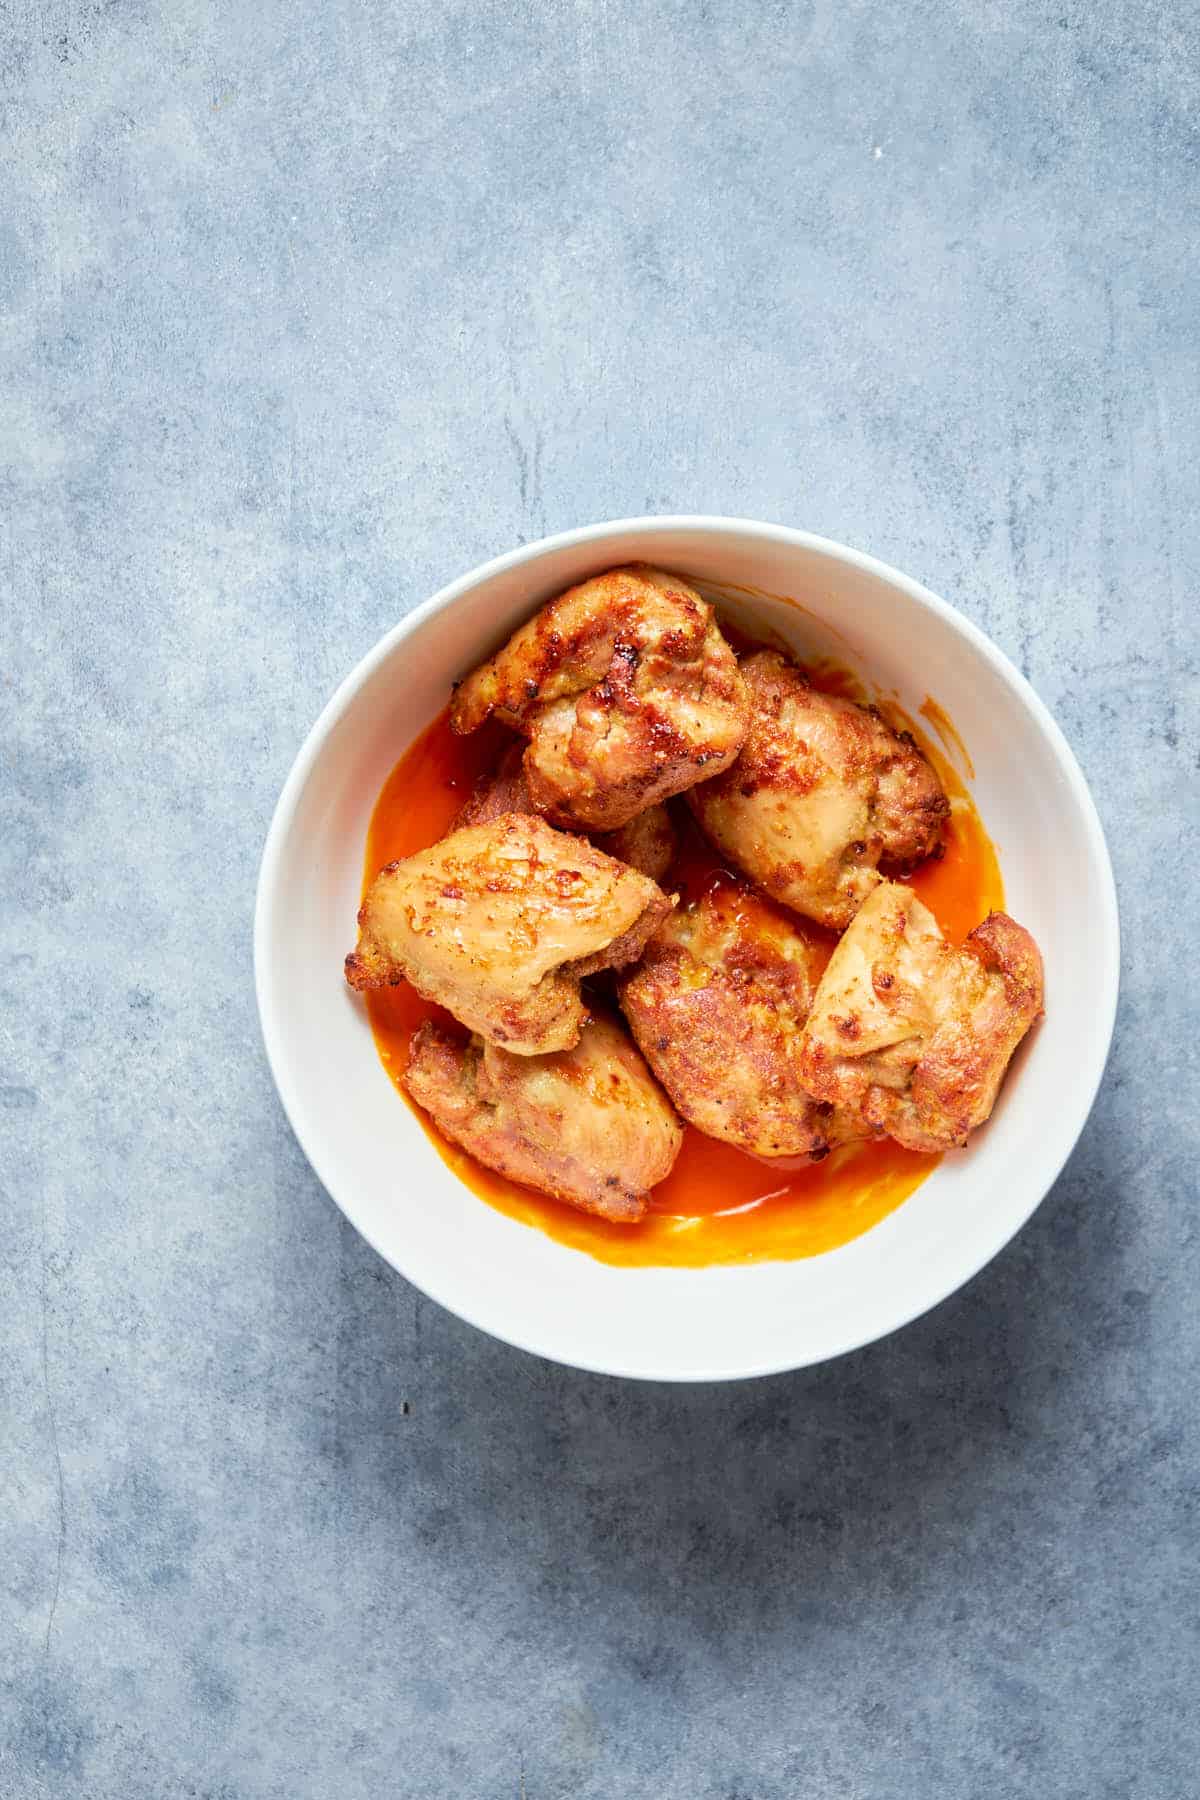 Coating the cooked chicken thighs with buffalo sauce in a bowl.